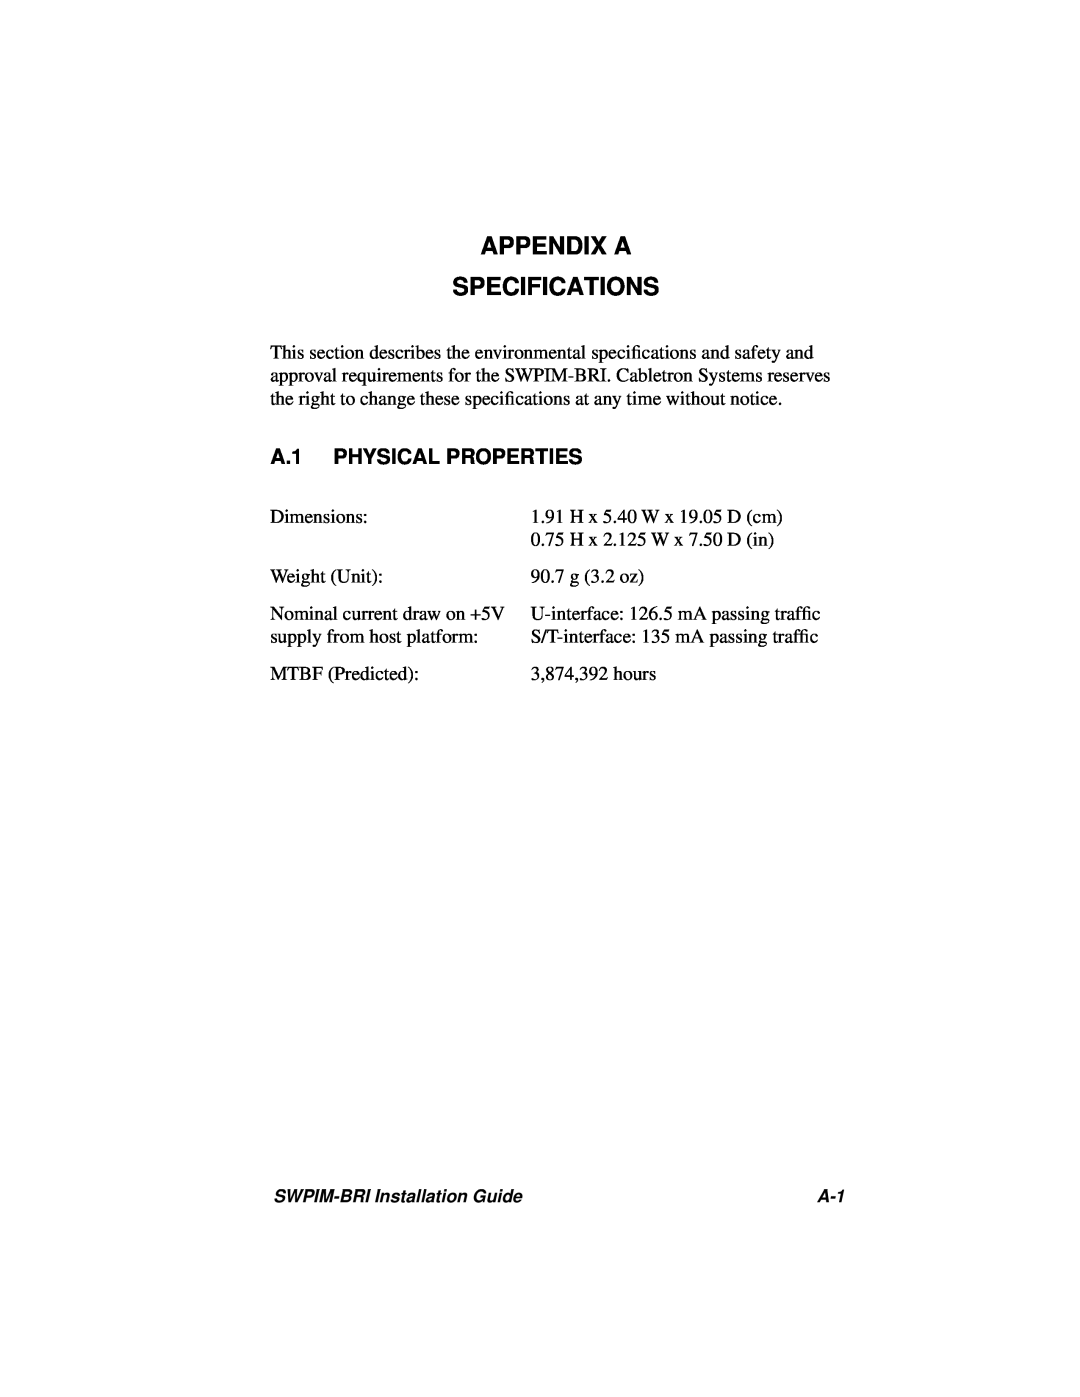 Cabletron Systems SWPIM-BRI manual Appendix A Specifications, A.1 PHYSICAL PROPERTIES 